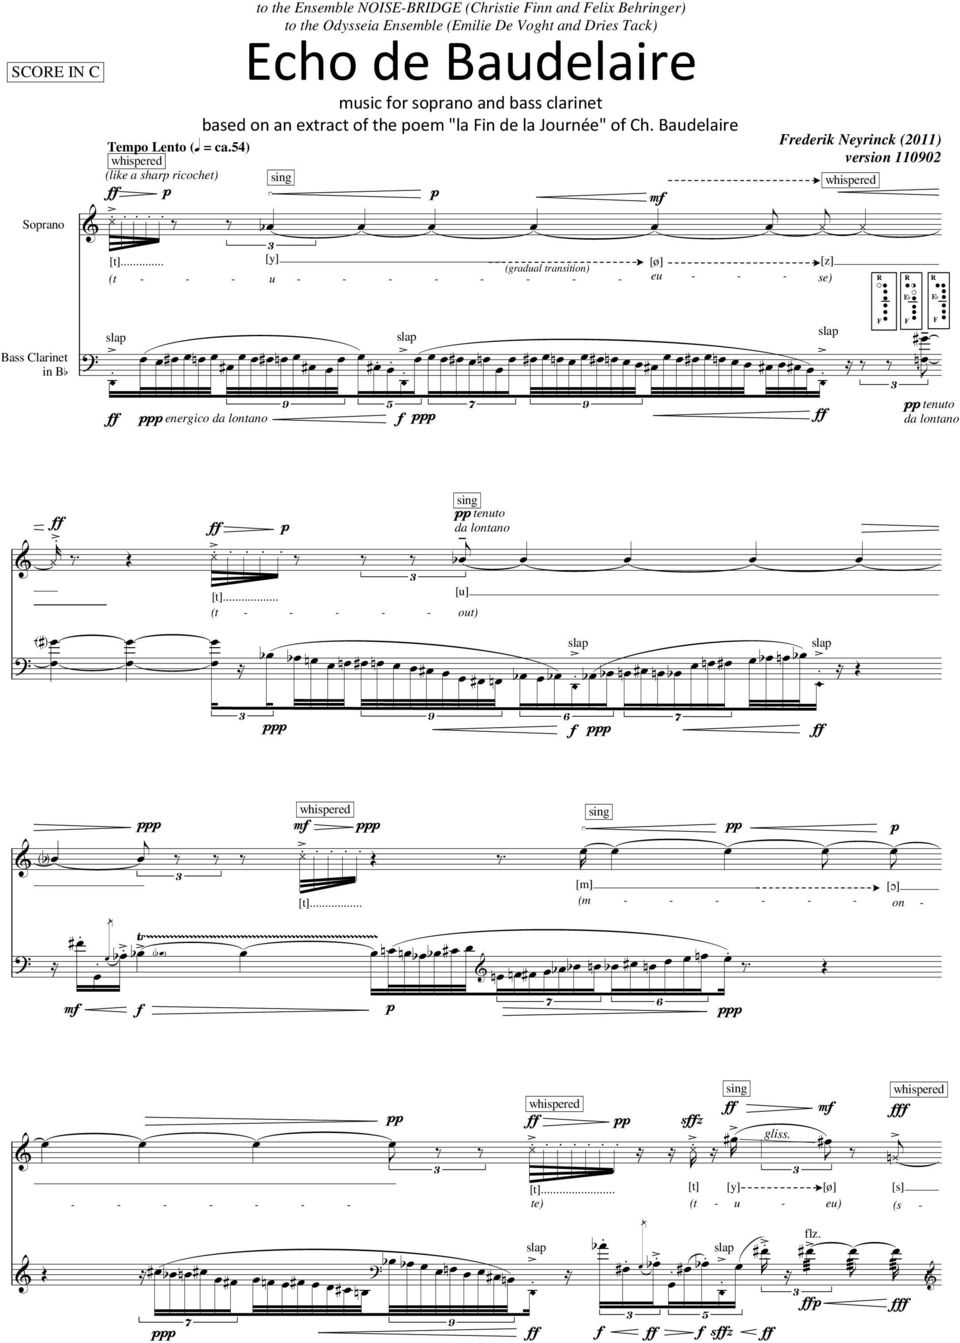 sorano and bass clarinet based on an extract o the oem "la Fin de la Journée" o Ch.